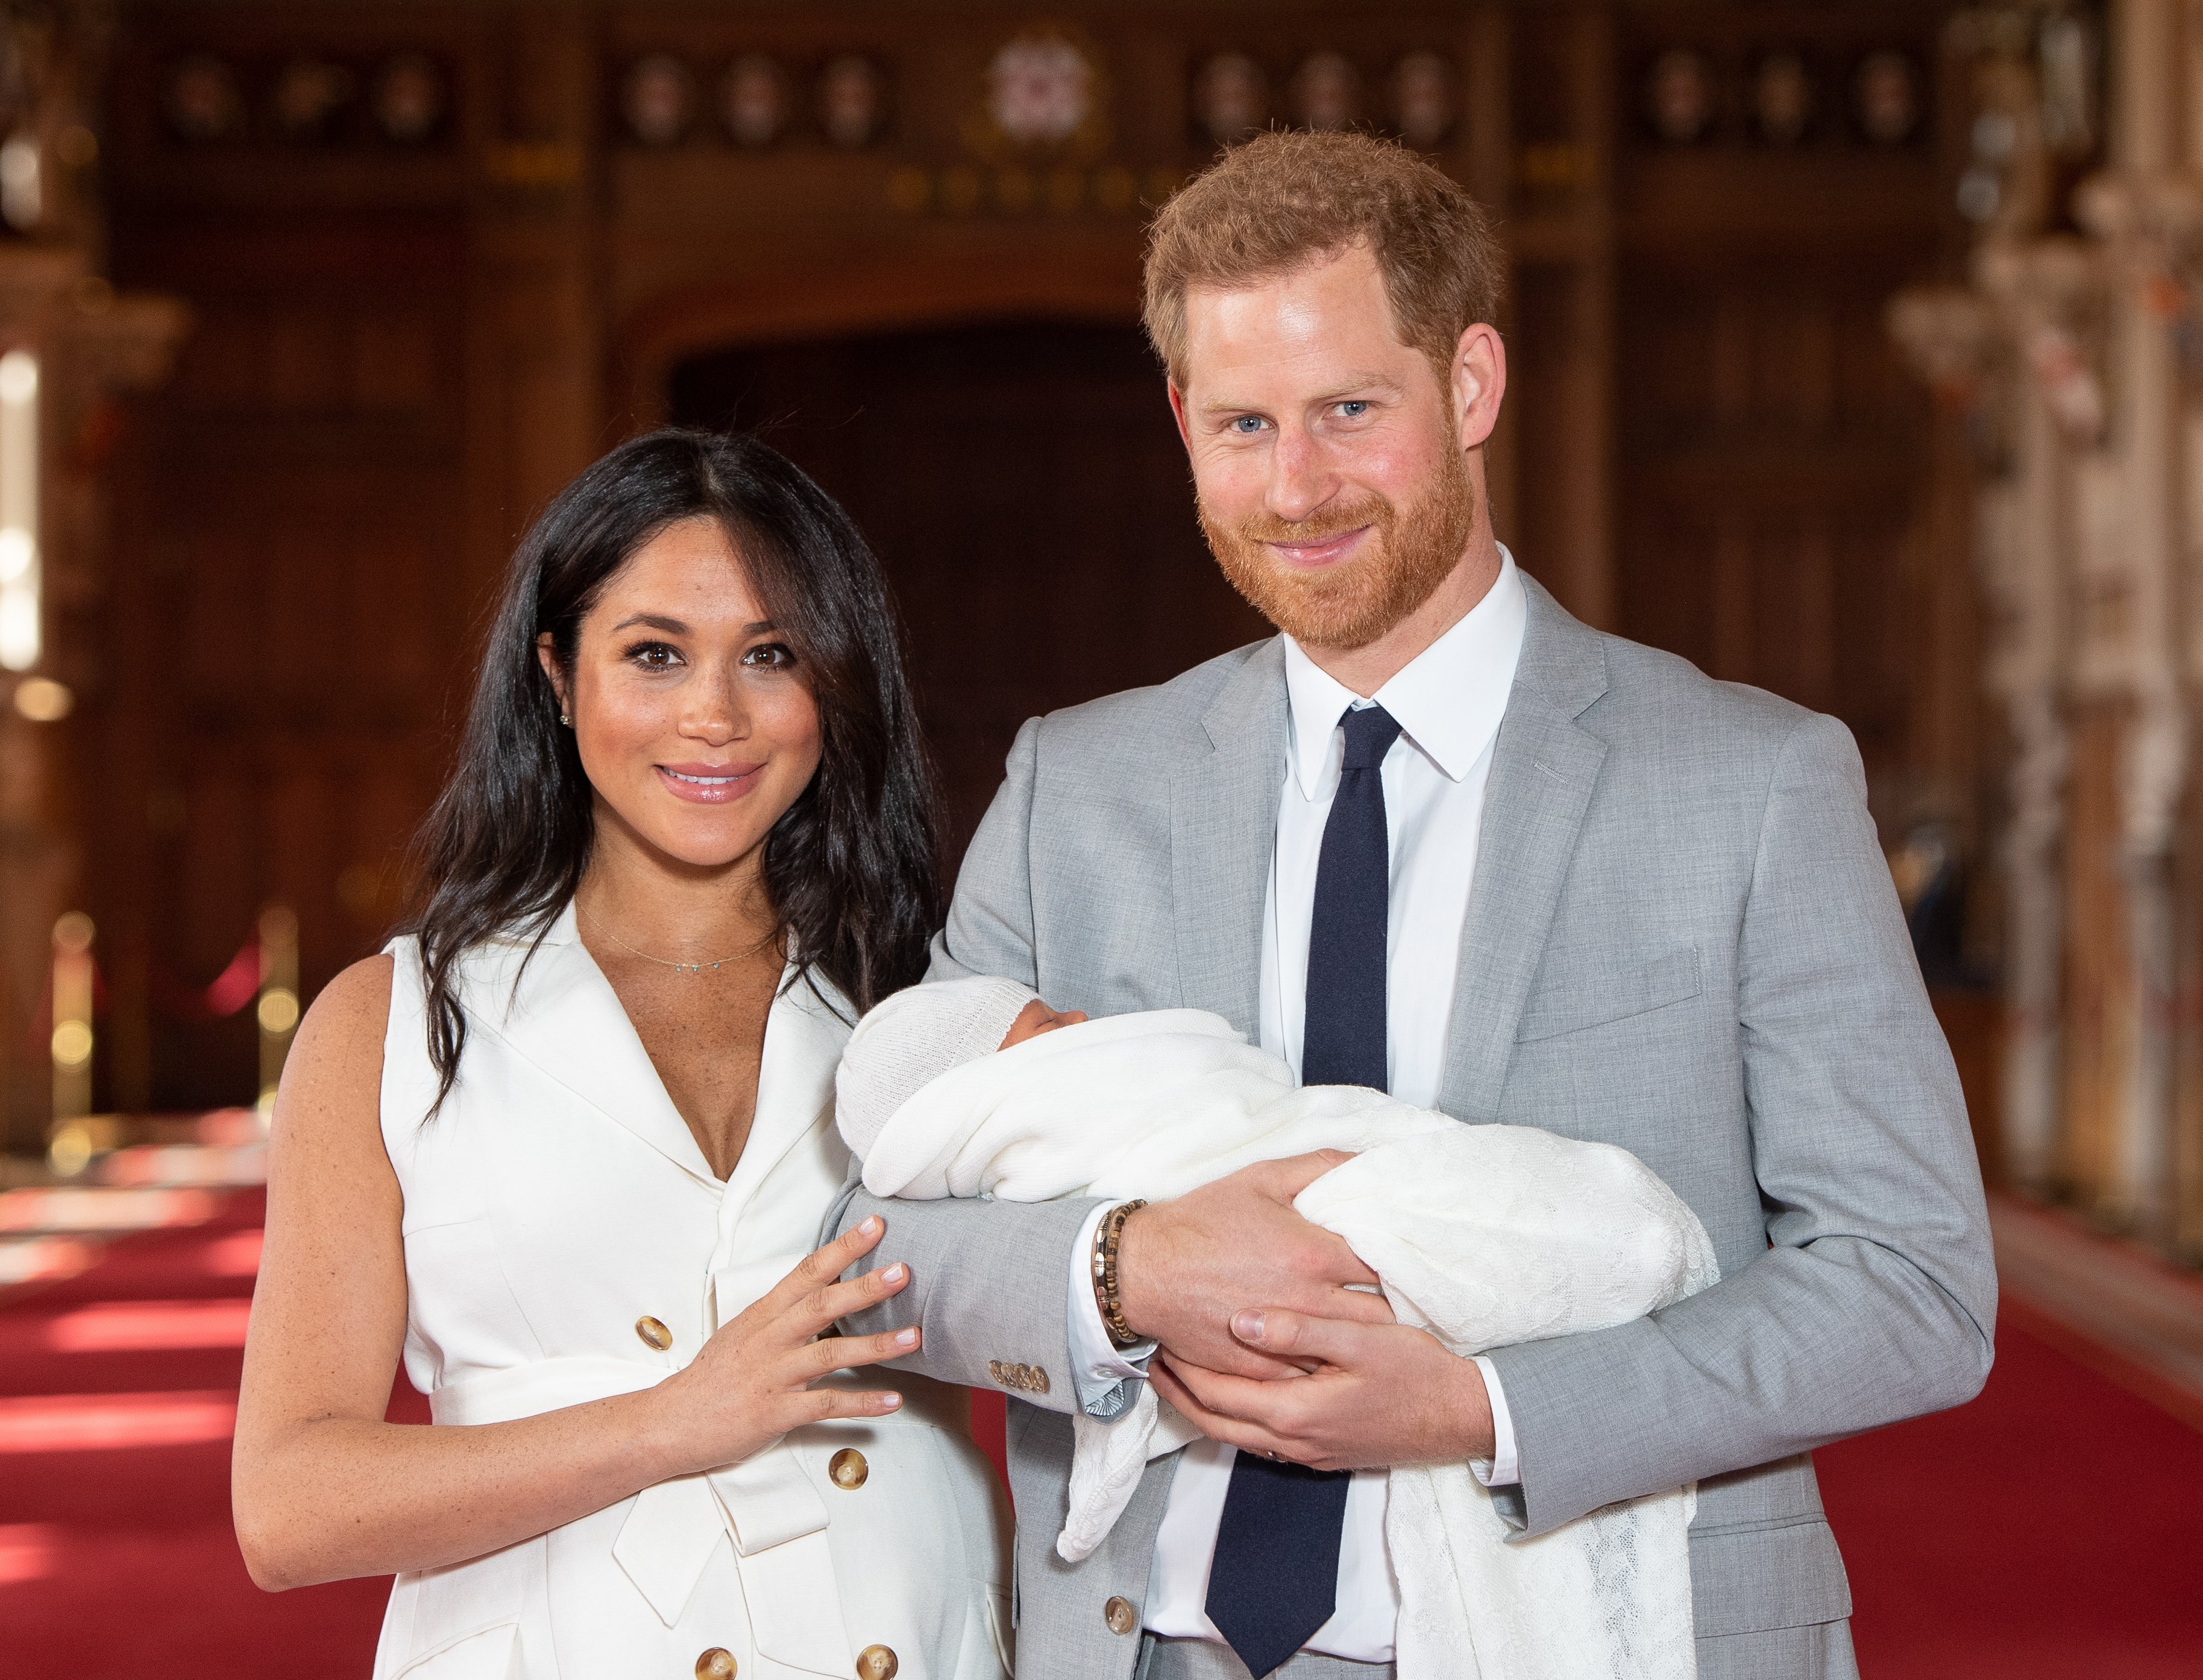 Prince Harry, Duke of Sussex and Meghan, Duchess of Sussex, pose with their newborn son Archie Harrison Mountbatten-Windsor in St George's Hall at Windsor Castle on May 8, 2019 in Windsor, England | Source: Getty Images